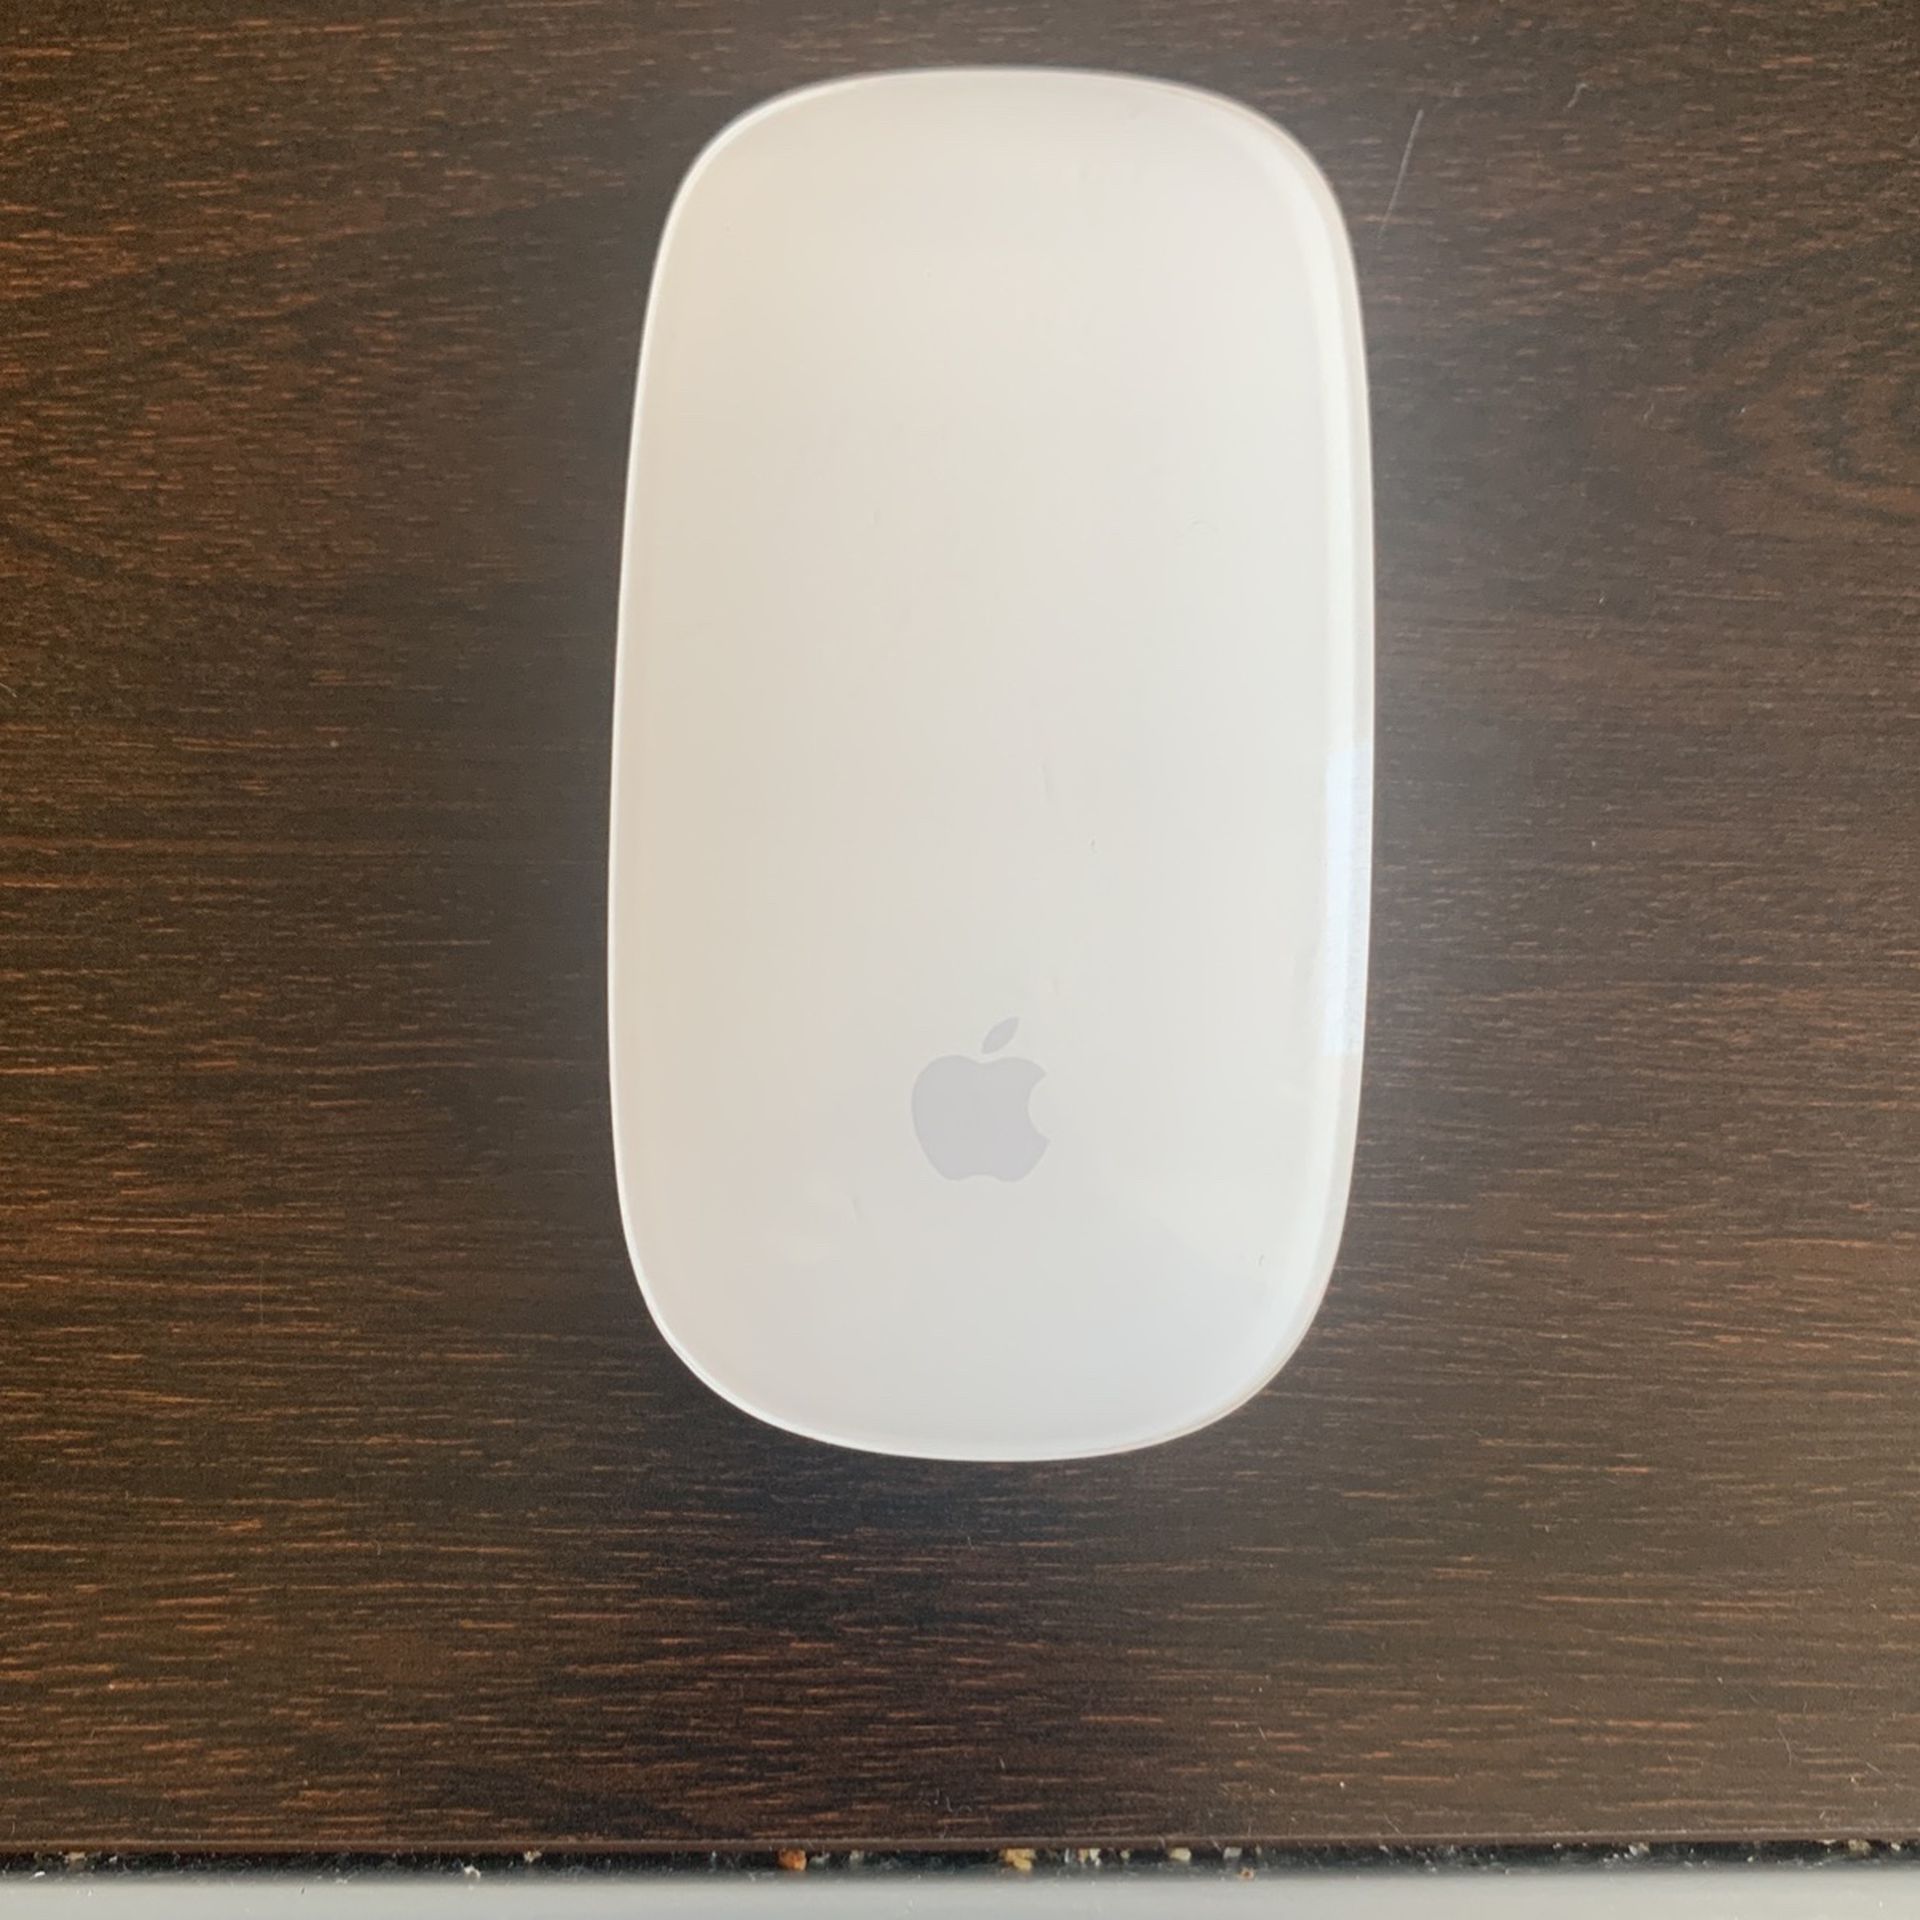 White Apple Mouse